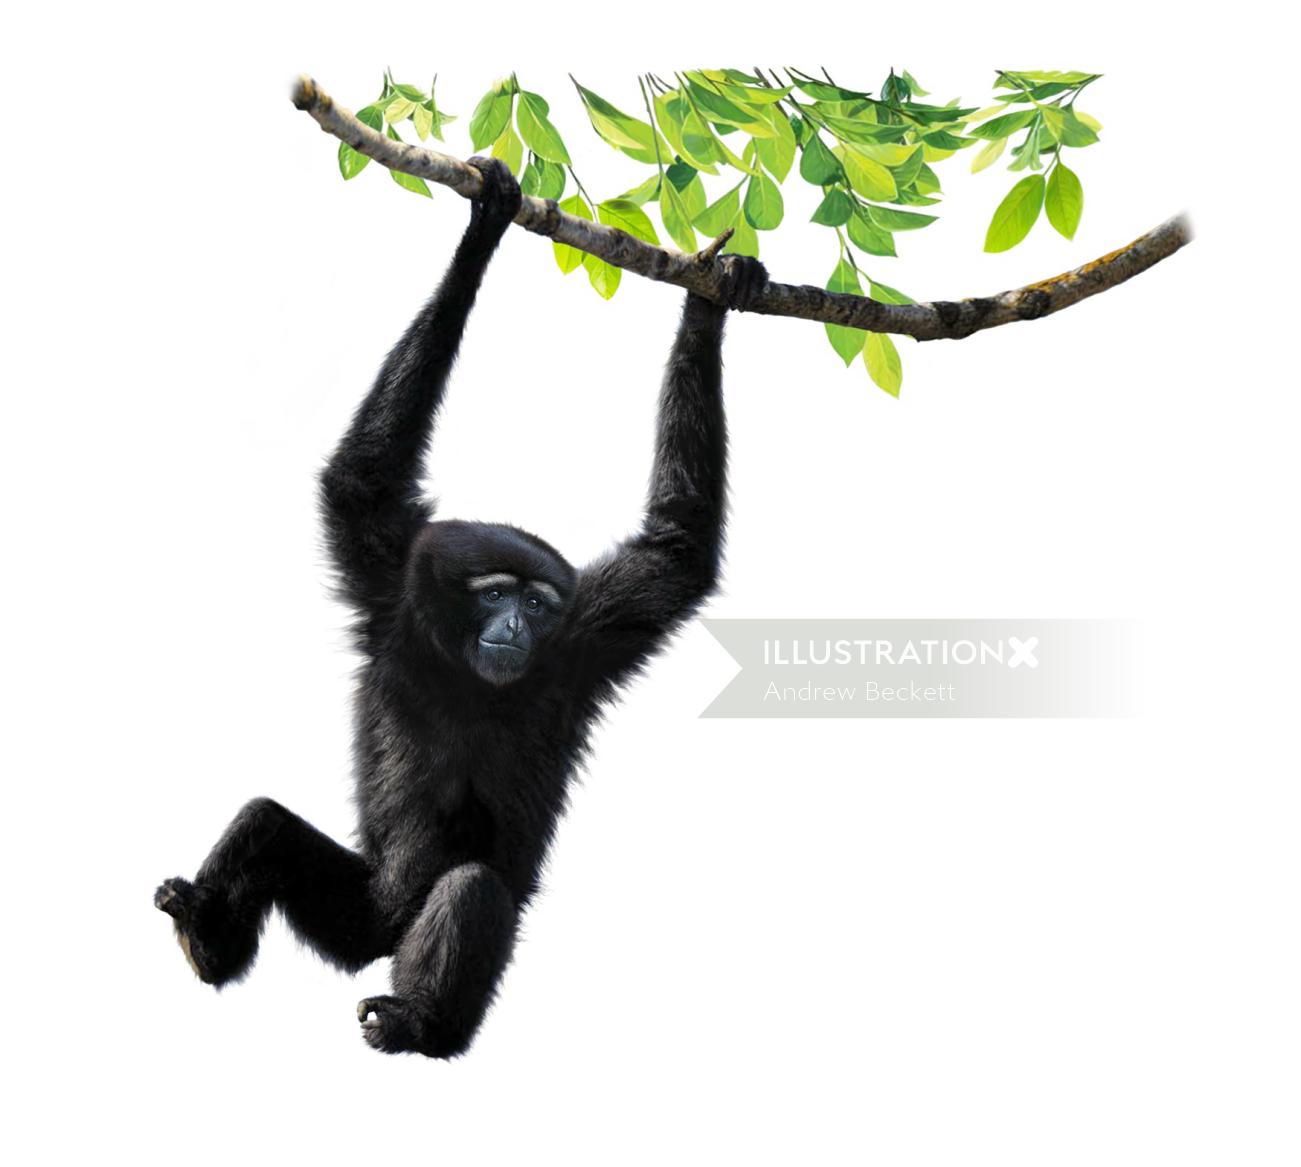 Artwork of a Chimpanzee hanging on a tree